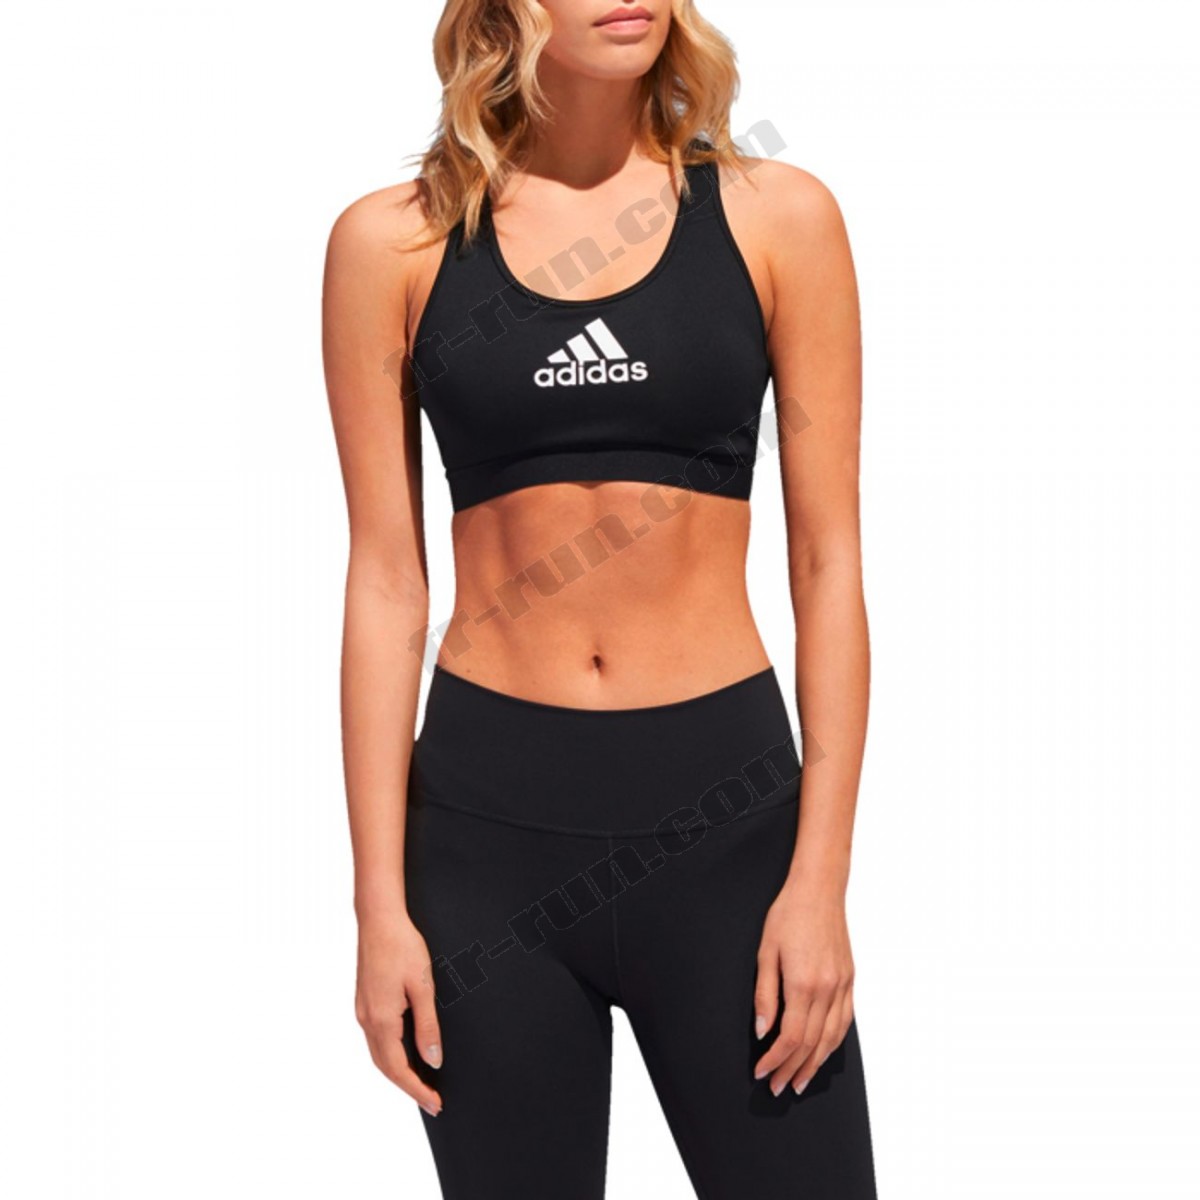 Adidas/BRASSIERE Fitness femme ADIDAS DRST ASK √ Nouveau style √ Soldes - -2